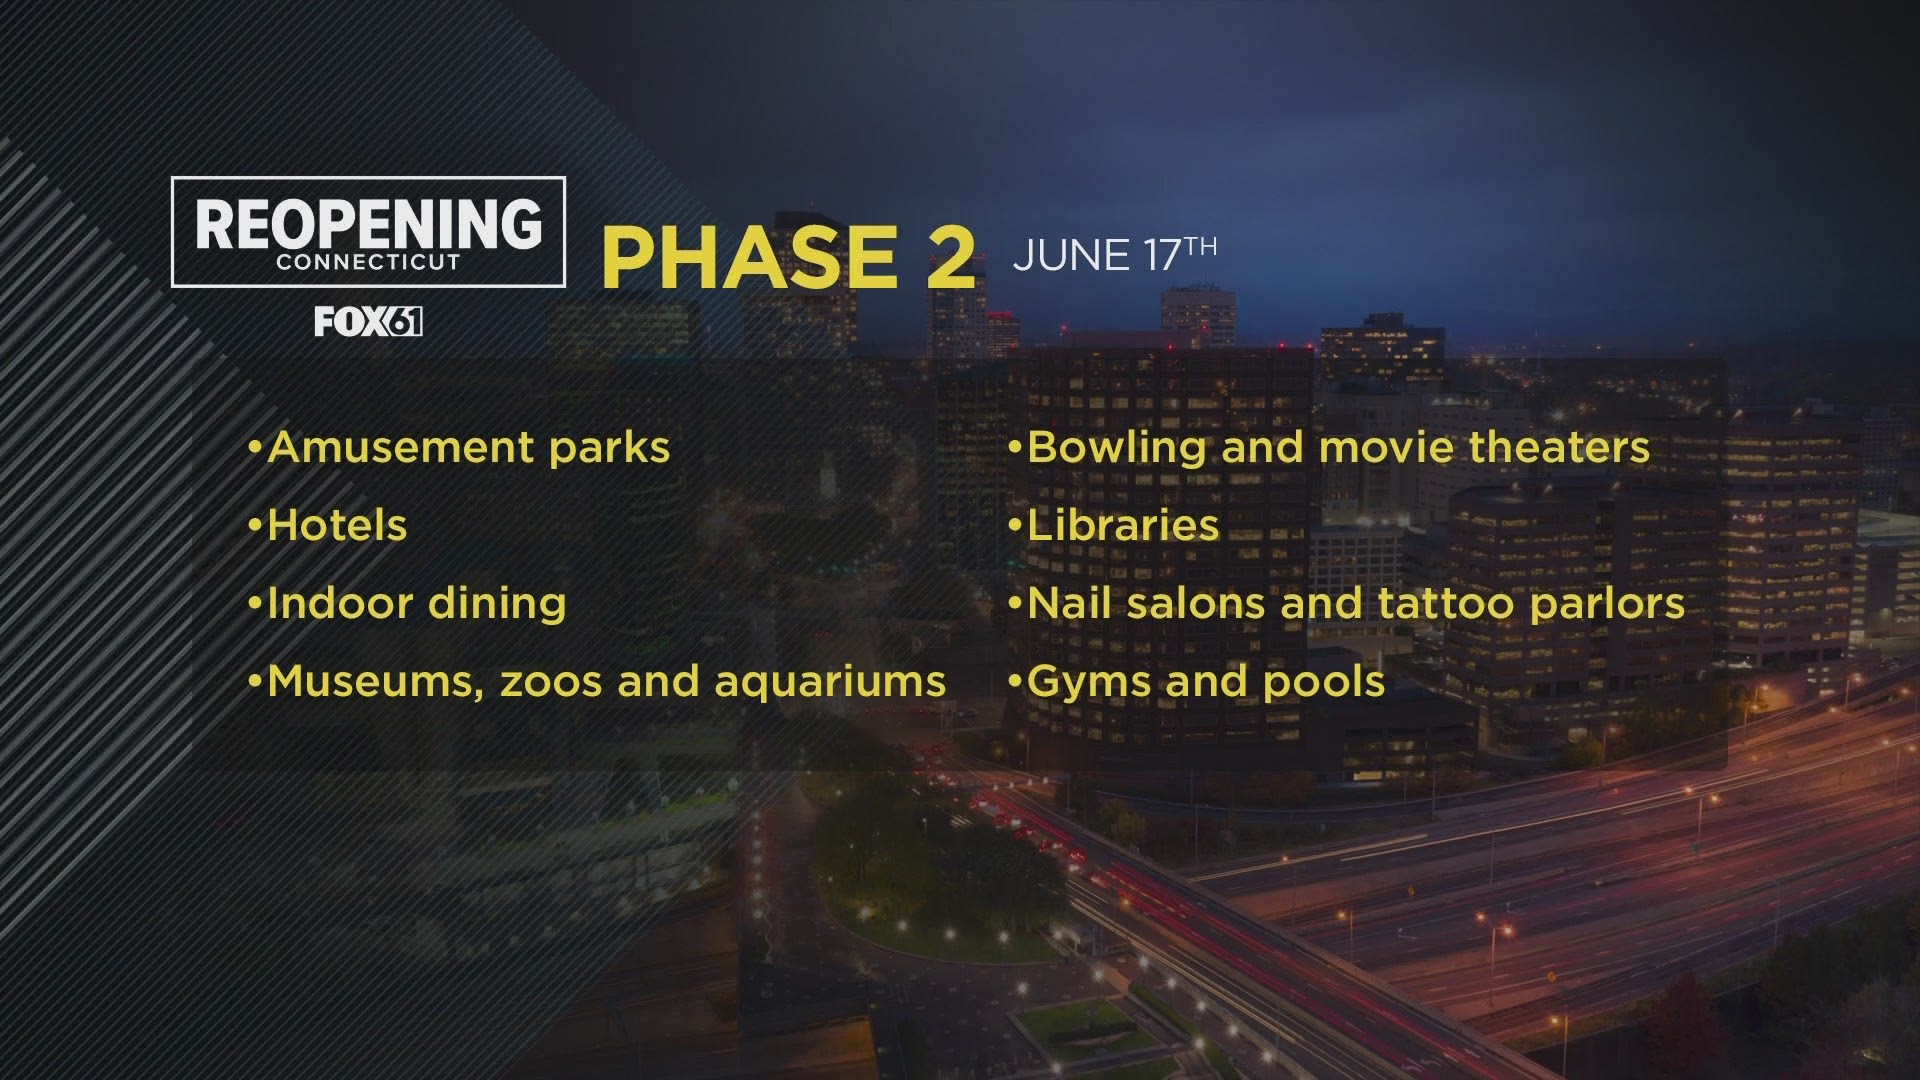 This phase allows for the reopening of amusement parks, hotels, indoor dining, museums and zoos among other things. The official start date is June 17.